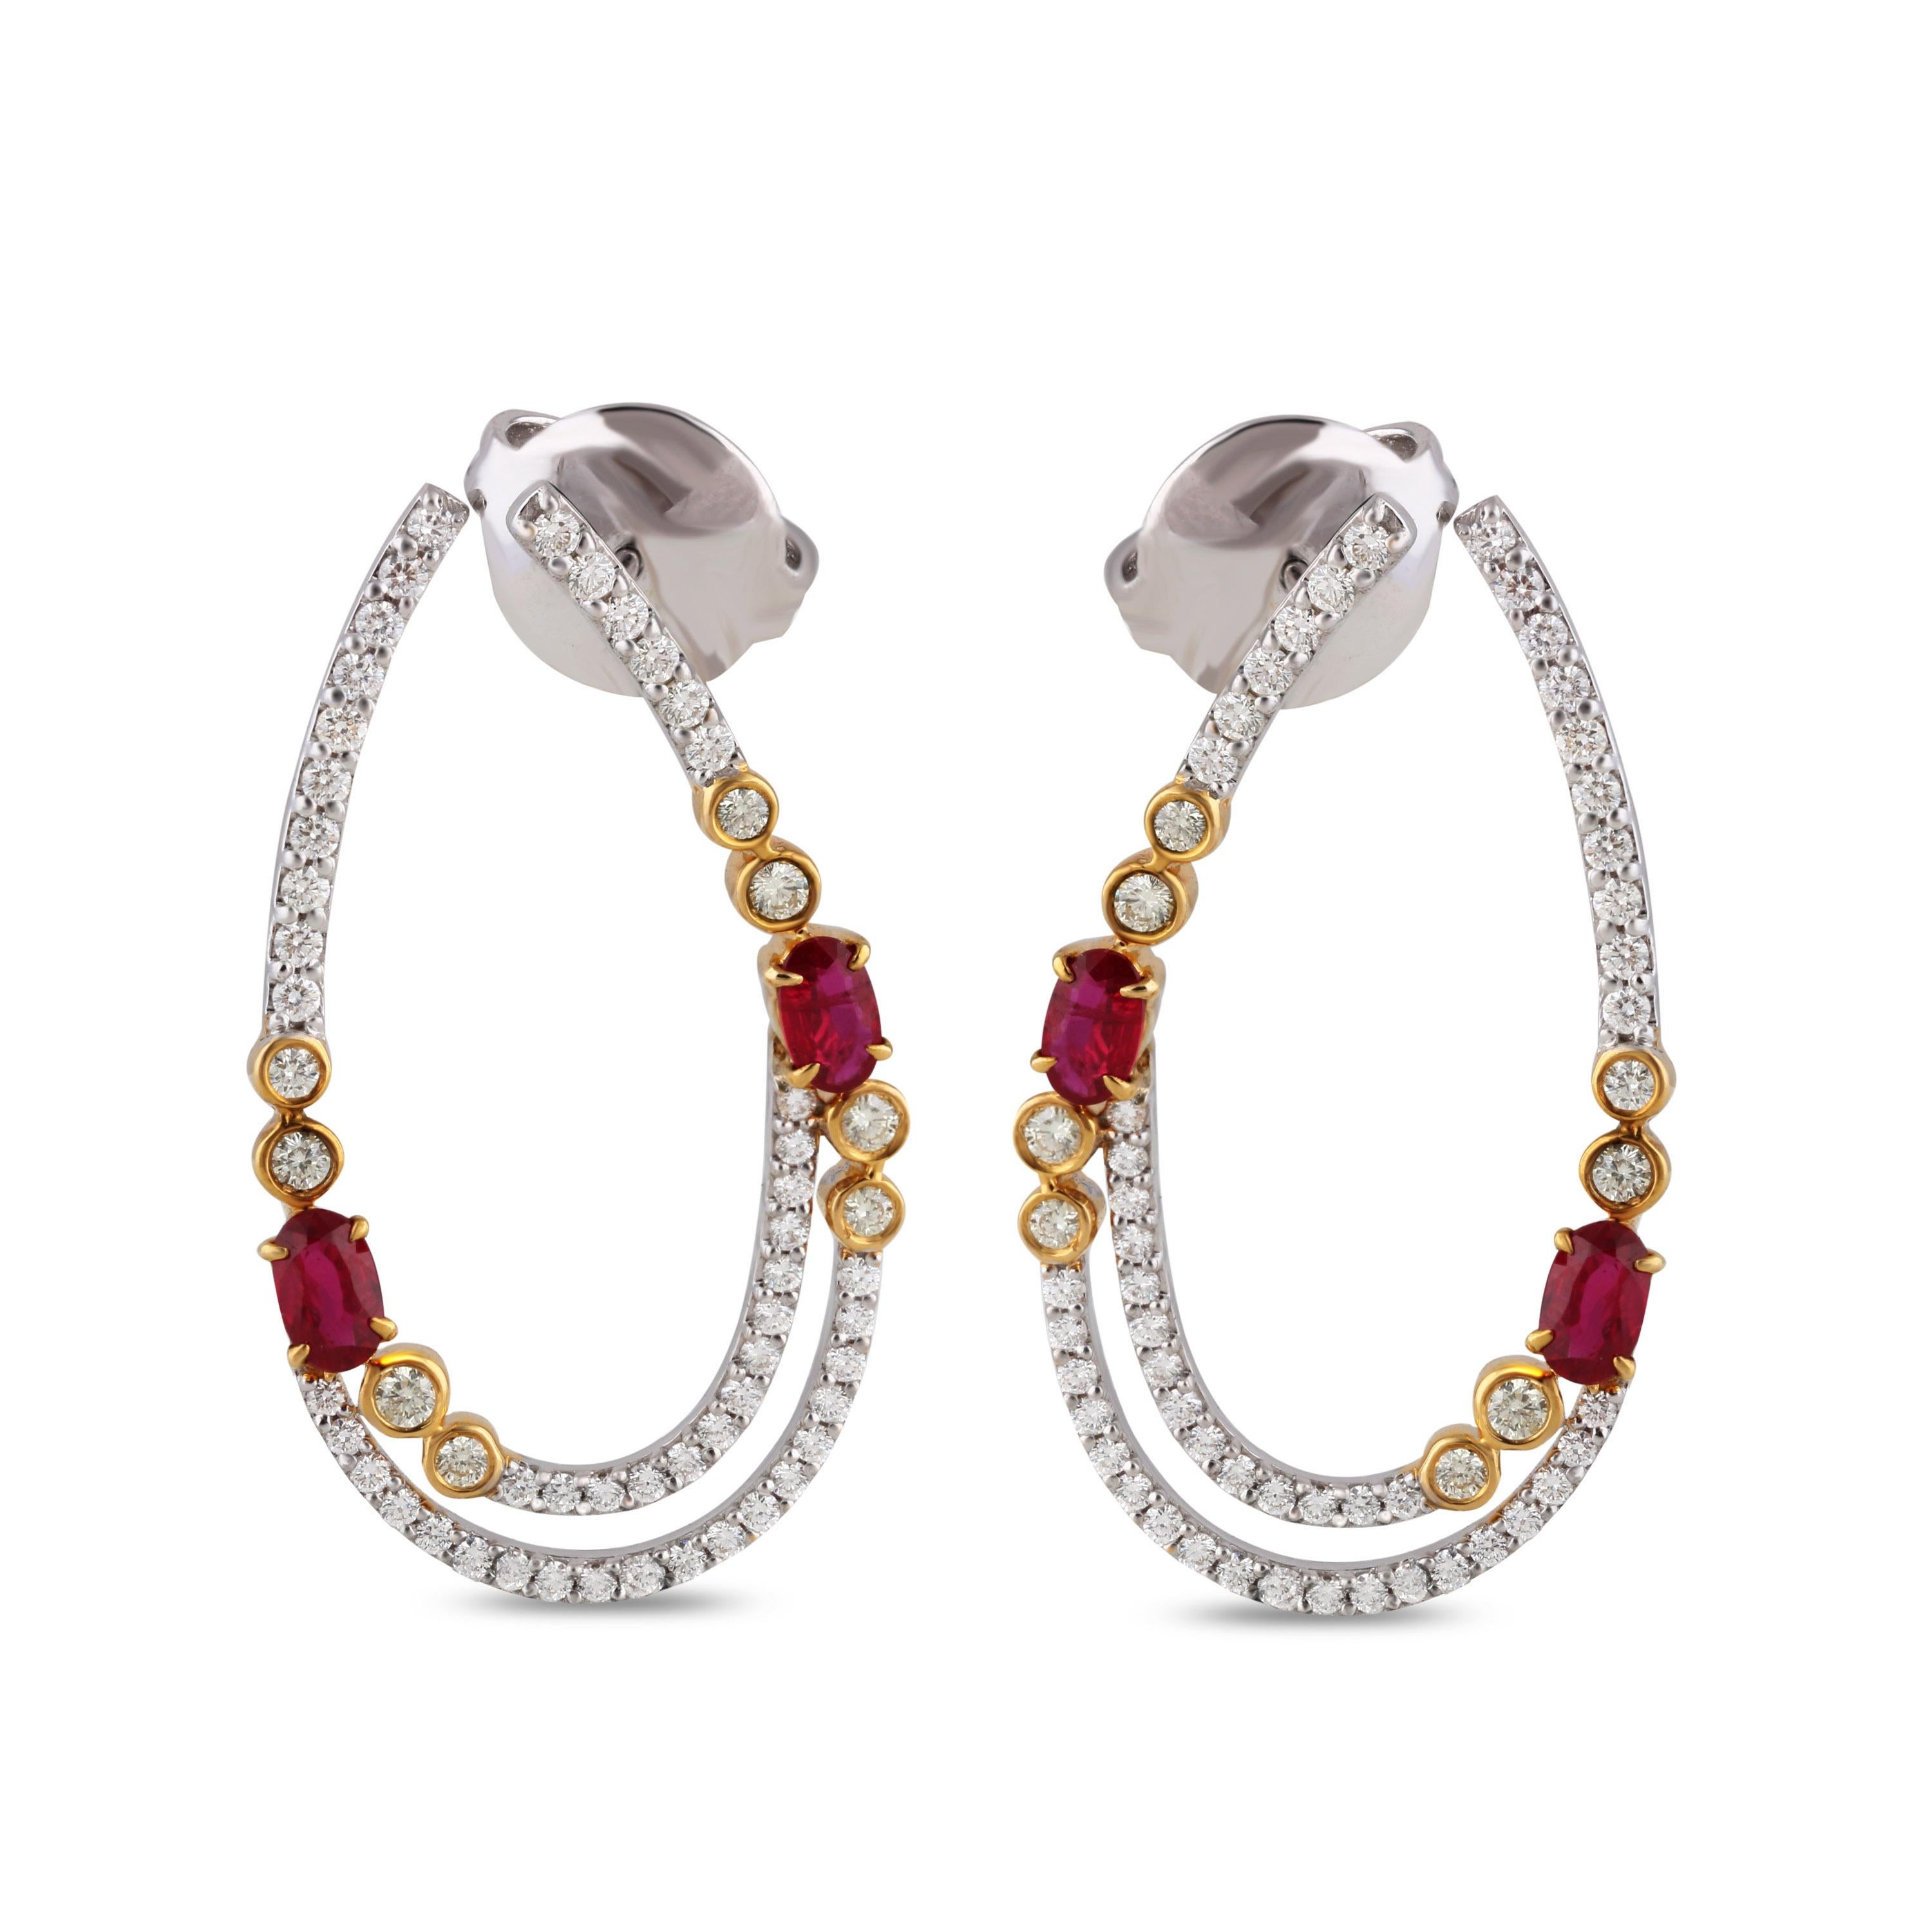 Elegant diamond hoops are accentuated by contrasting oval cut rubies flanked by yellow diamonds in a bezel setting of 18 karat yellow gold. Stylish and versatile, these hoops coordinate perfectly with both daytime and evening wear.

Video of the